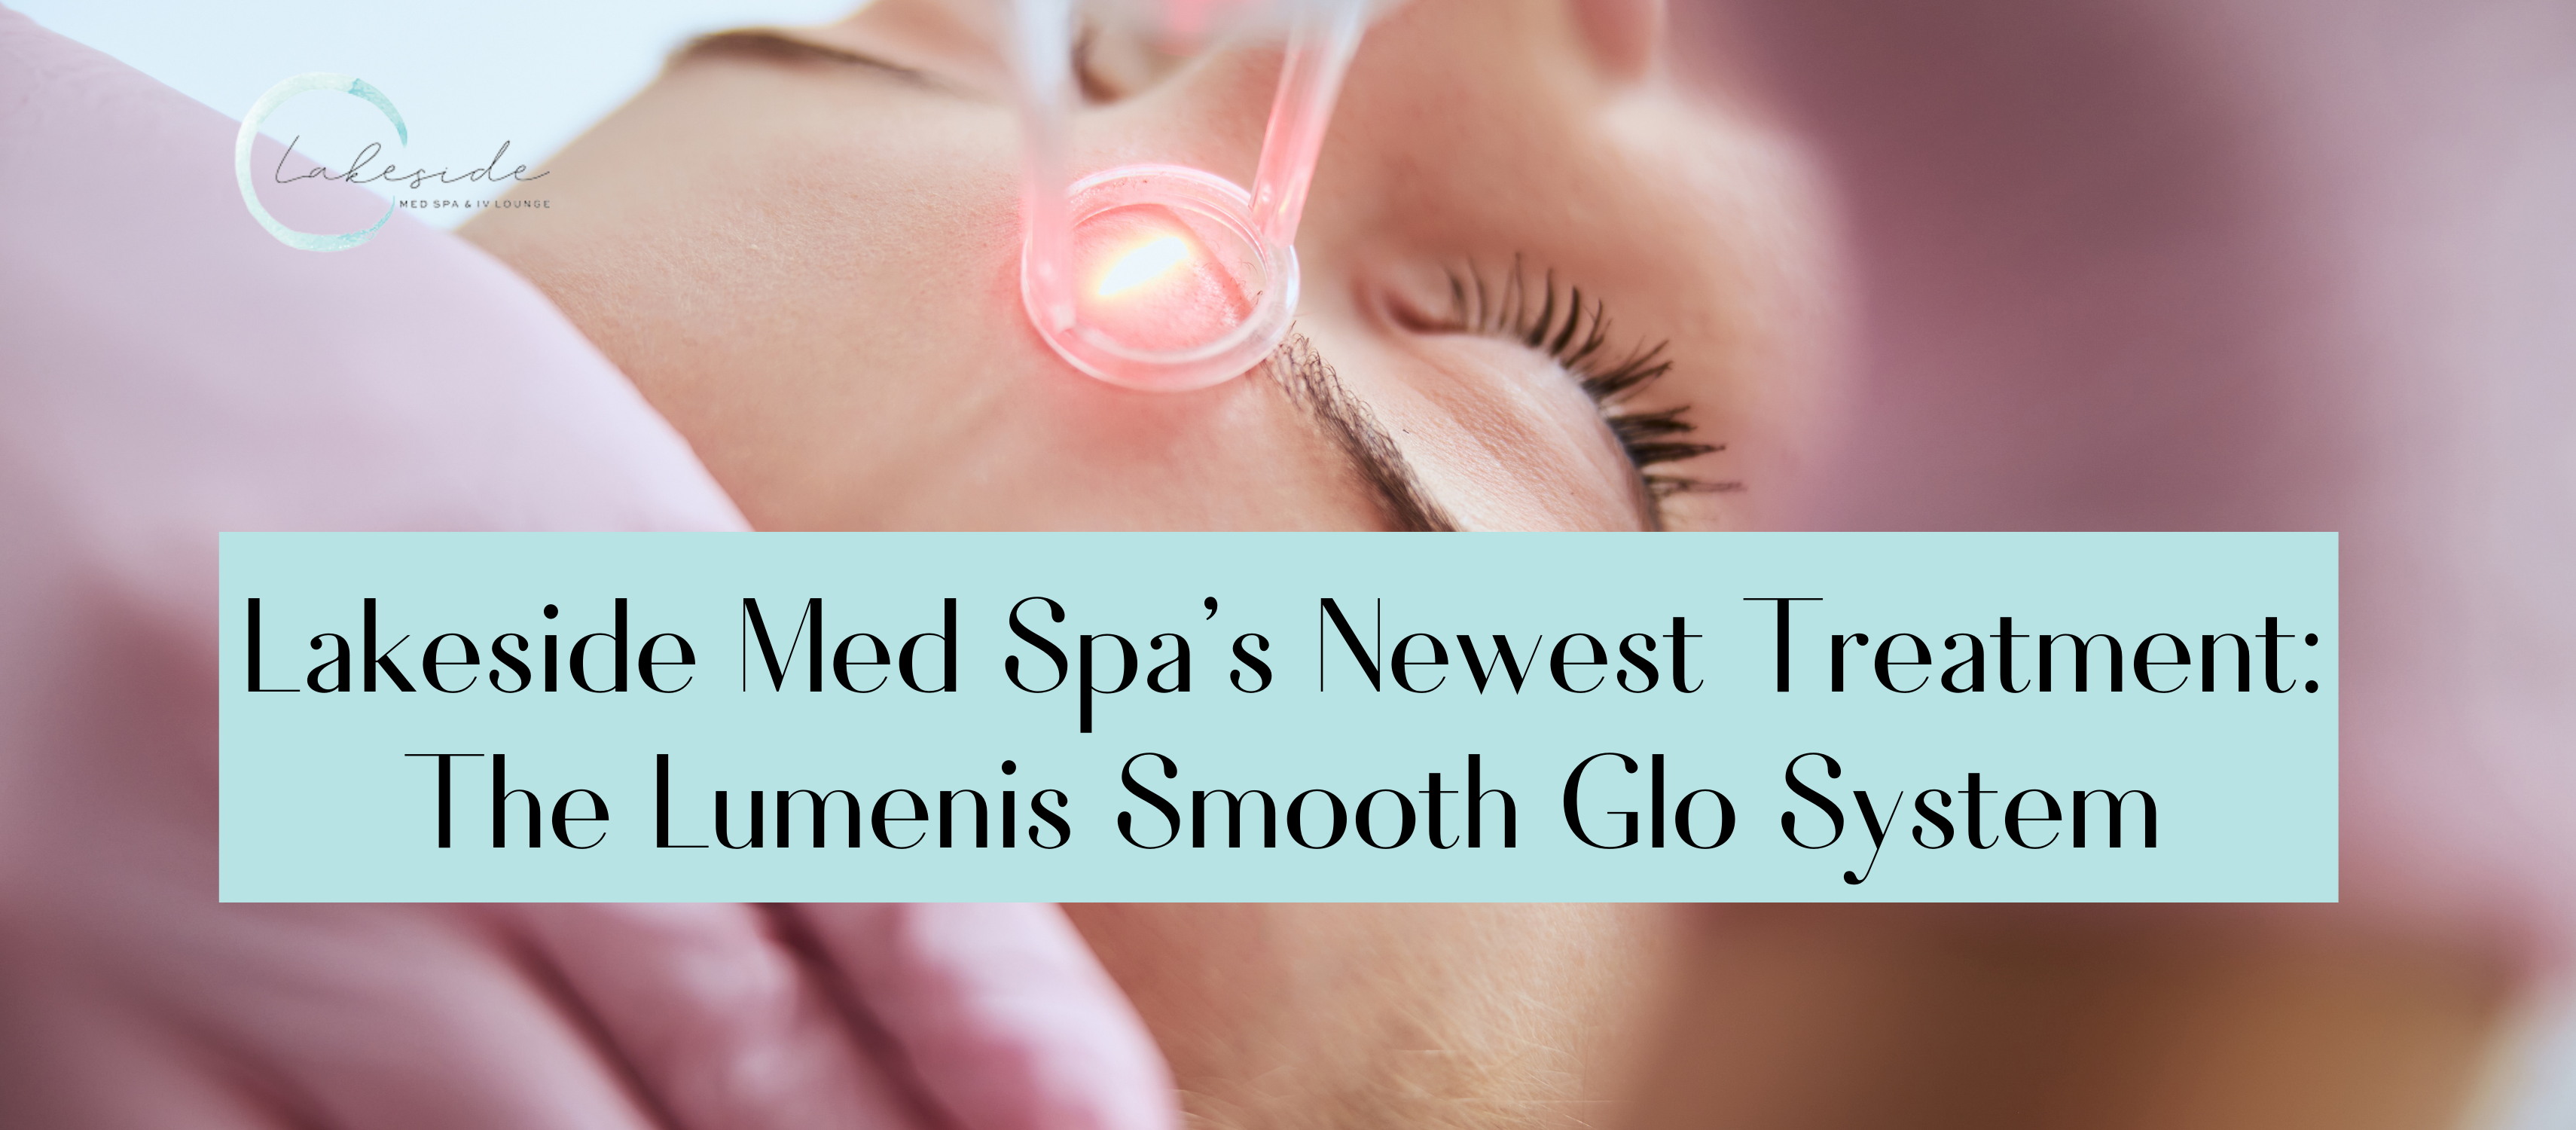 lumenis smooth glo at lakeside med spa